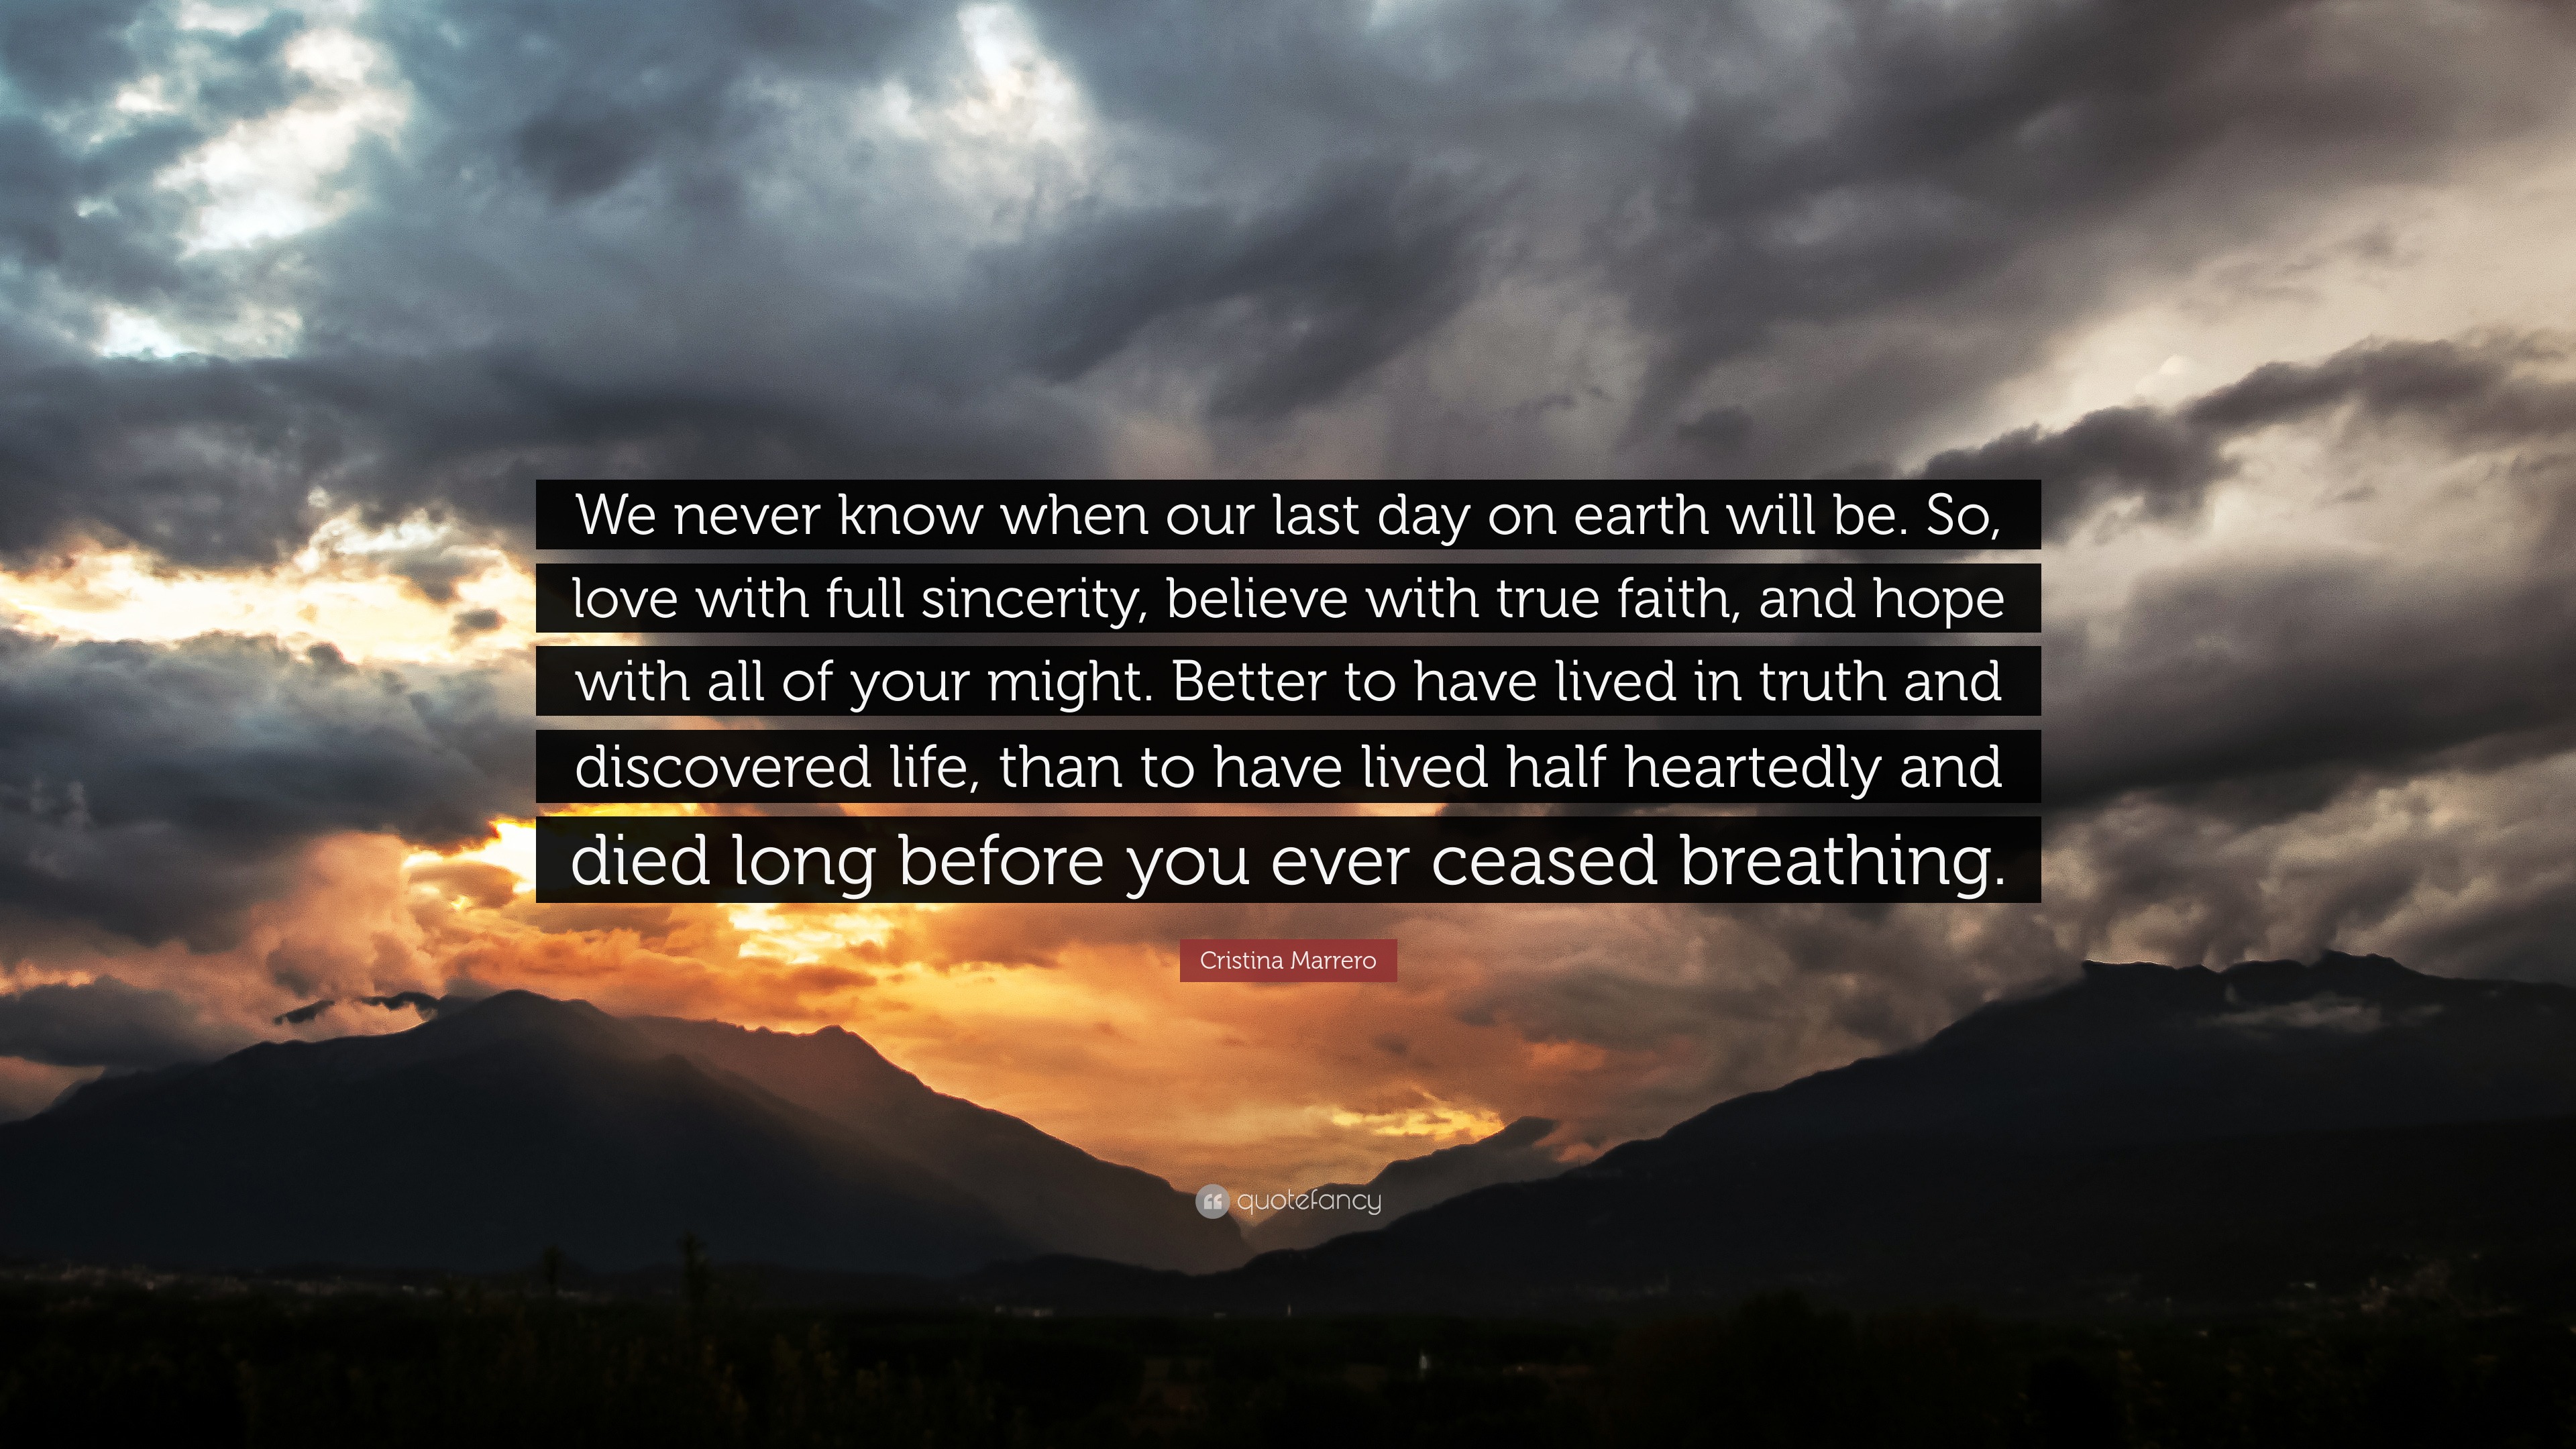 Cristina Marrero Quote “We never know when our last day on earth will be